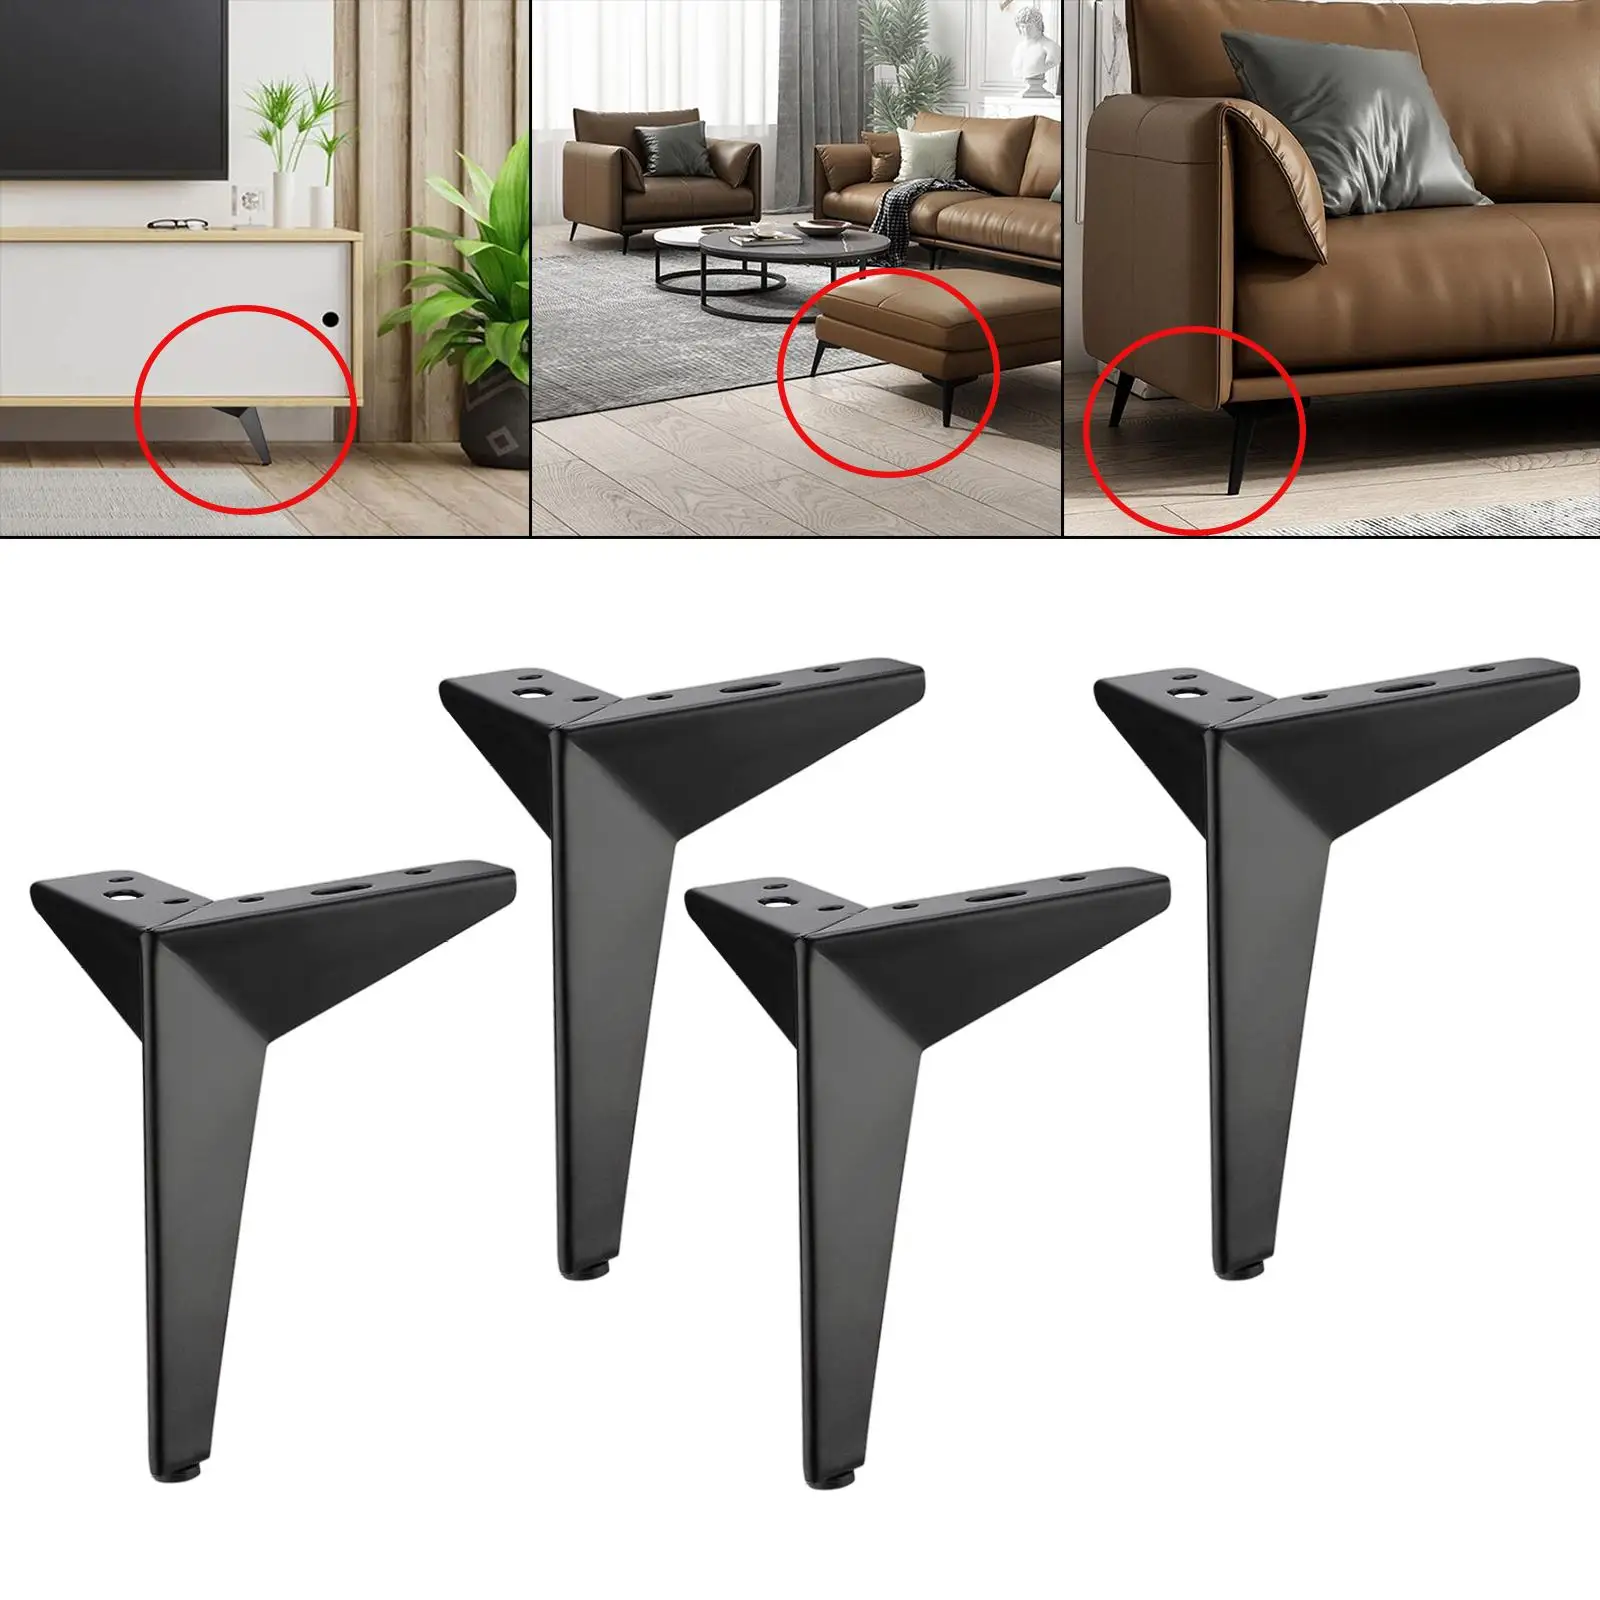 4x Heavy Duty Iron Triangle Furniture Legs Loveseat Couch Leg Modern Style Replacement Legs for Dresser, TV Cupboard, Furniture,